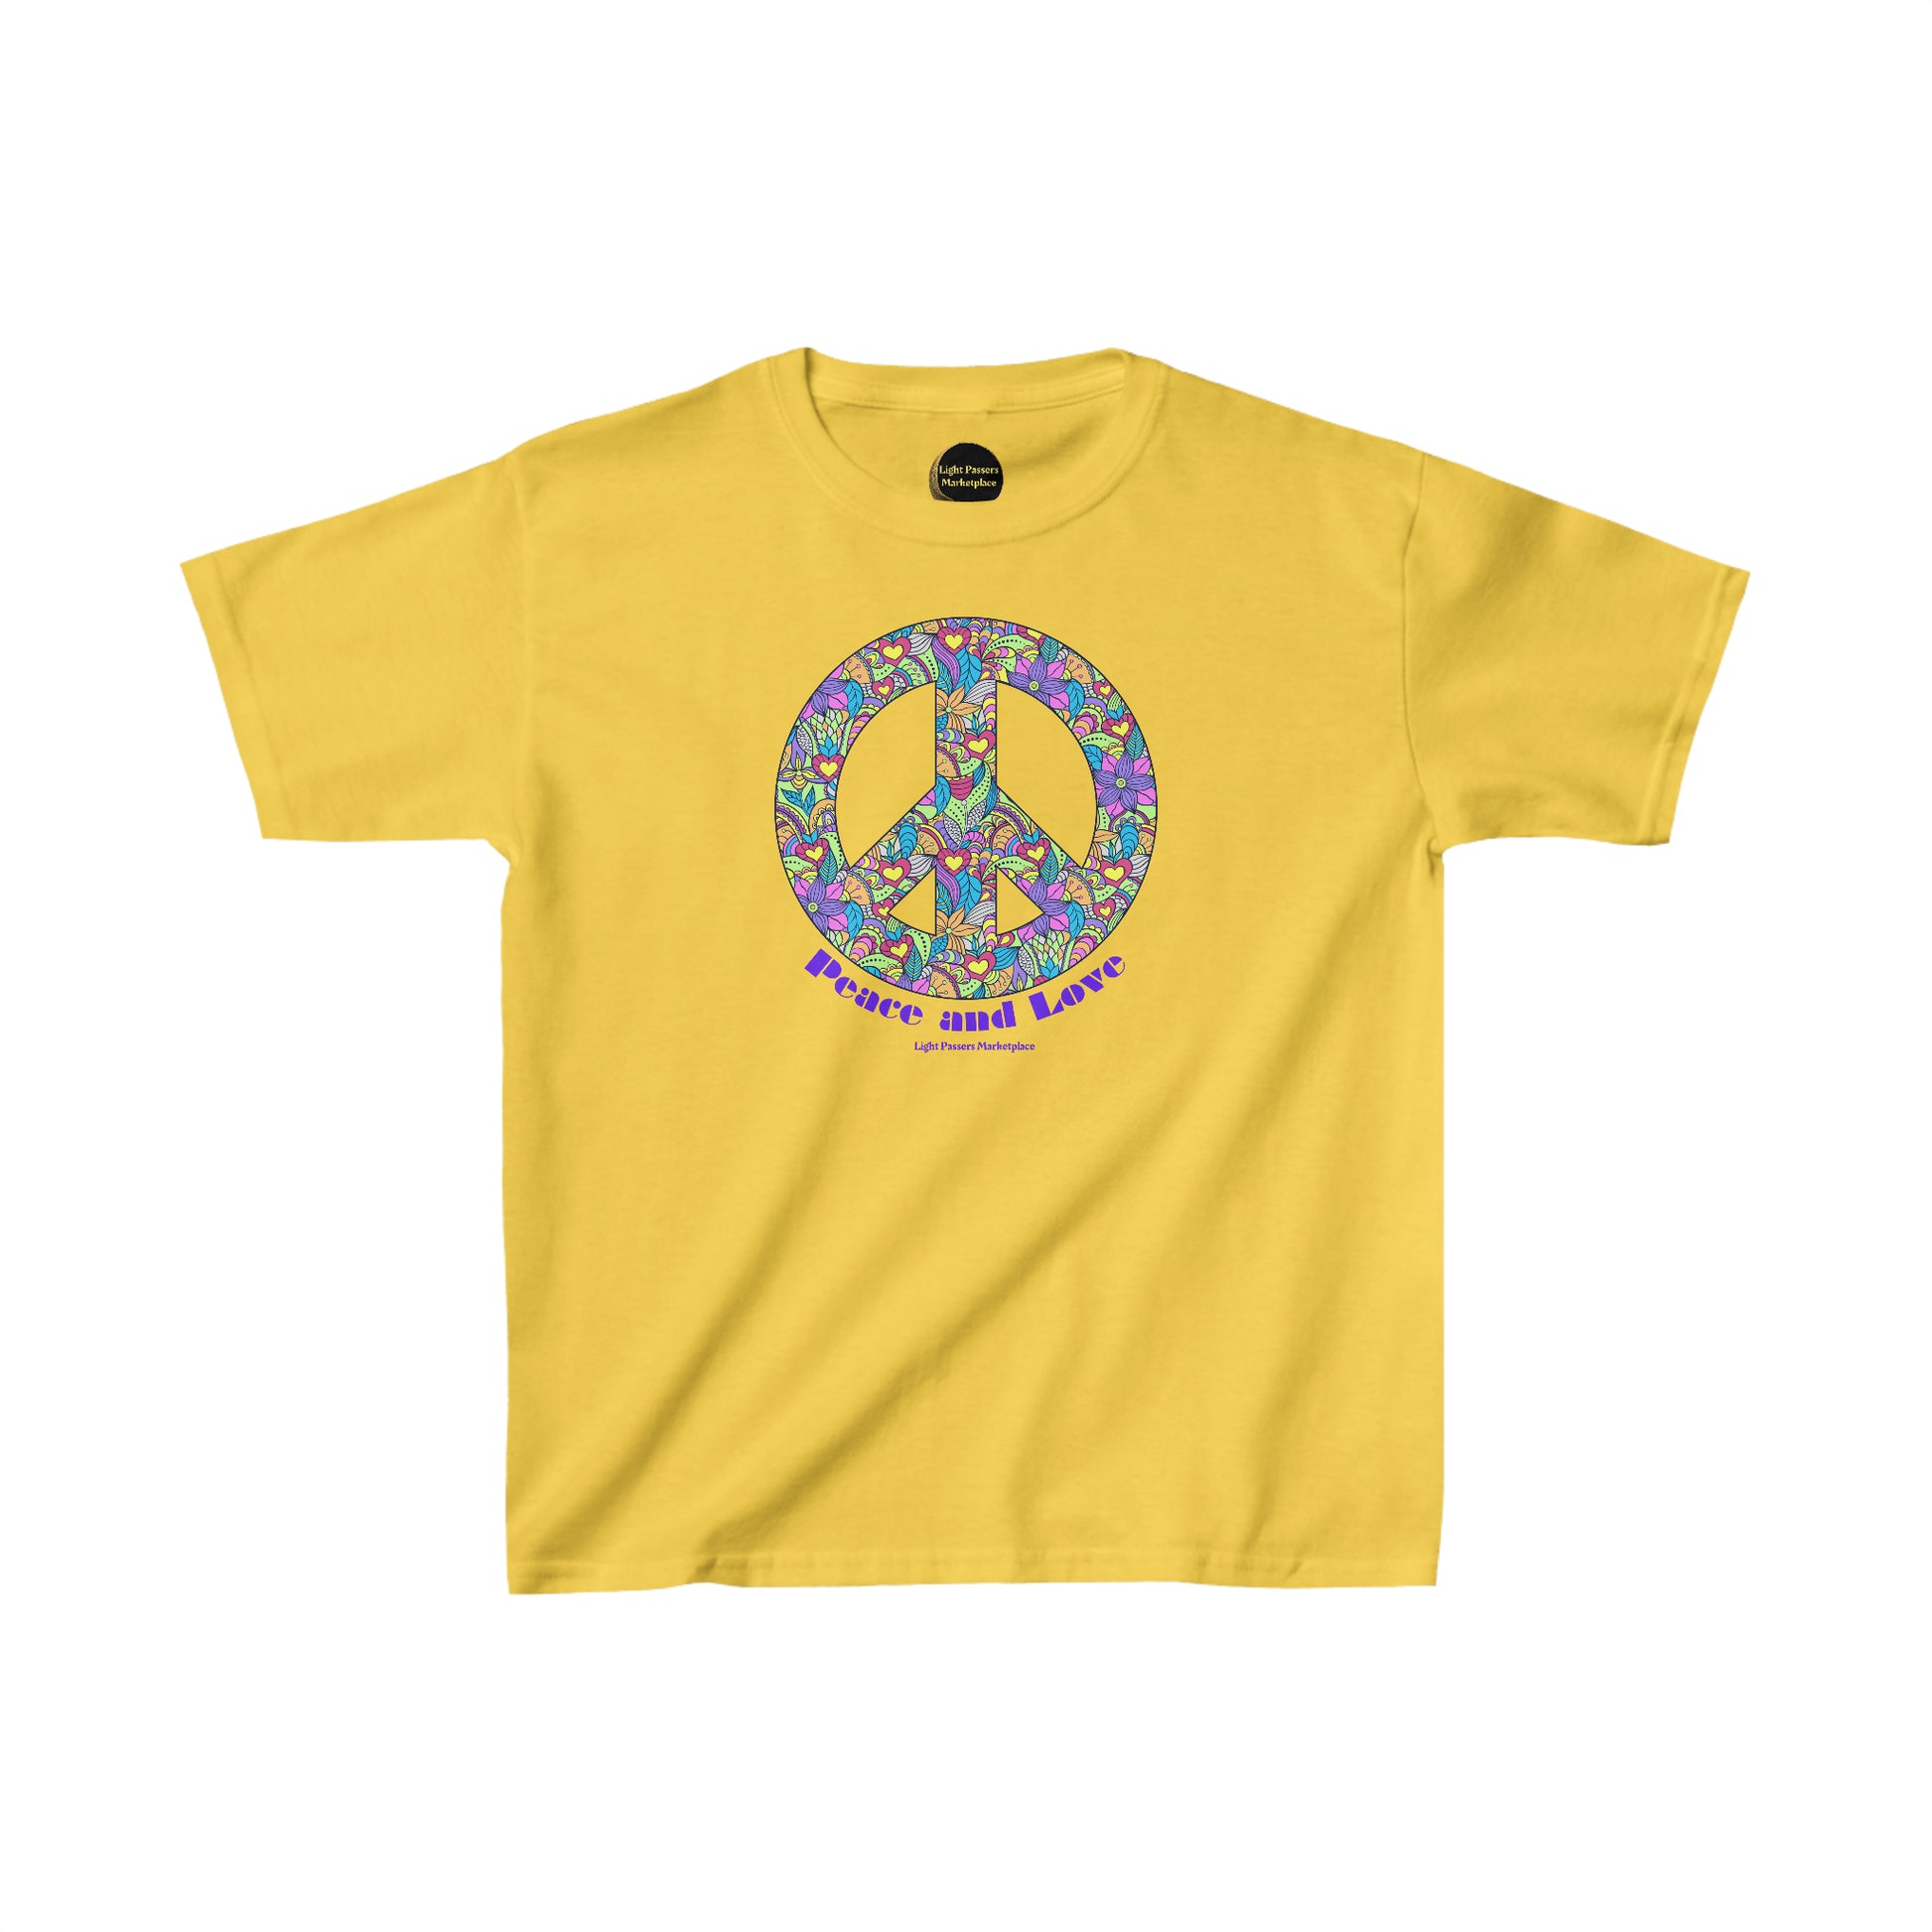 A yellow youth t-shirt featuring a peace sign adorned with flowers and hearts. Made of 100% cotton, with twill tape shoulders for durability and a curl-resistant collar. Ethically sourced US cotton.